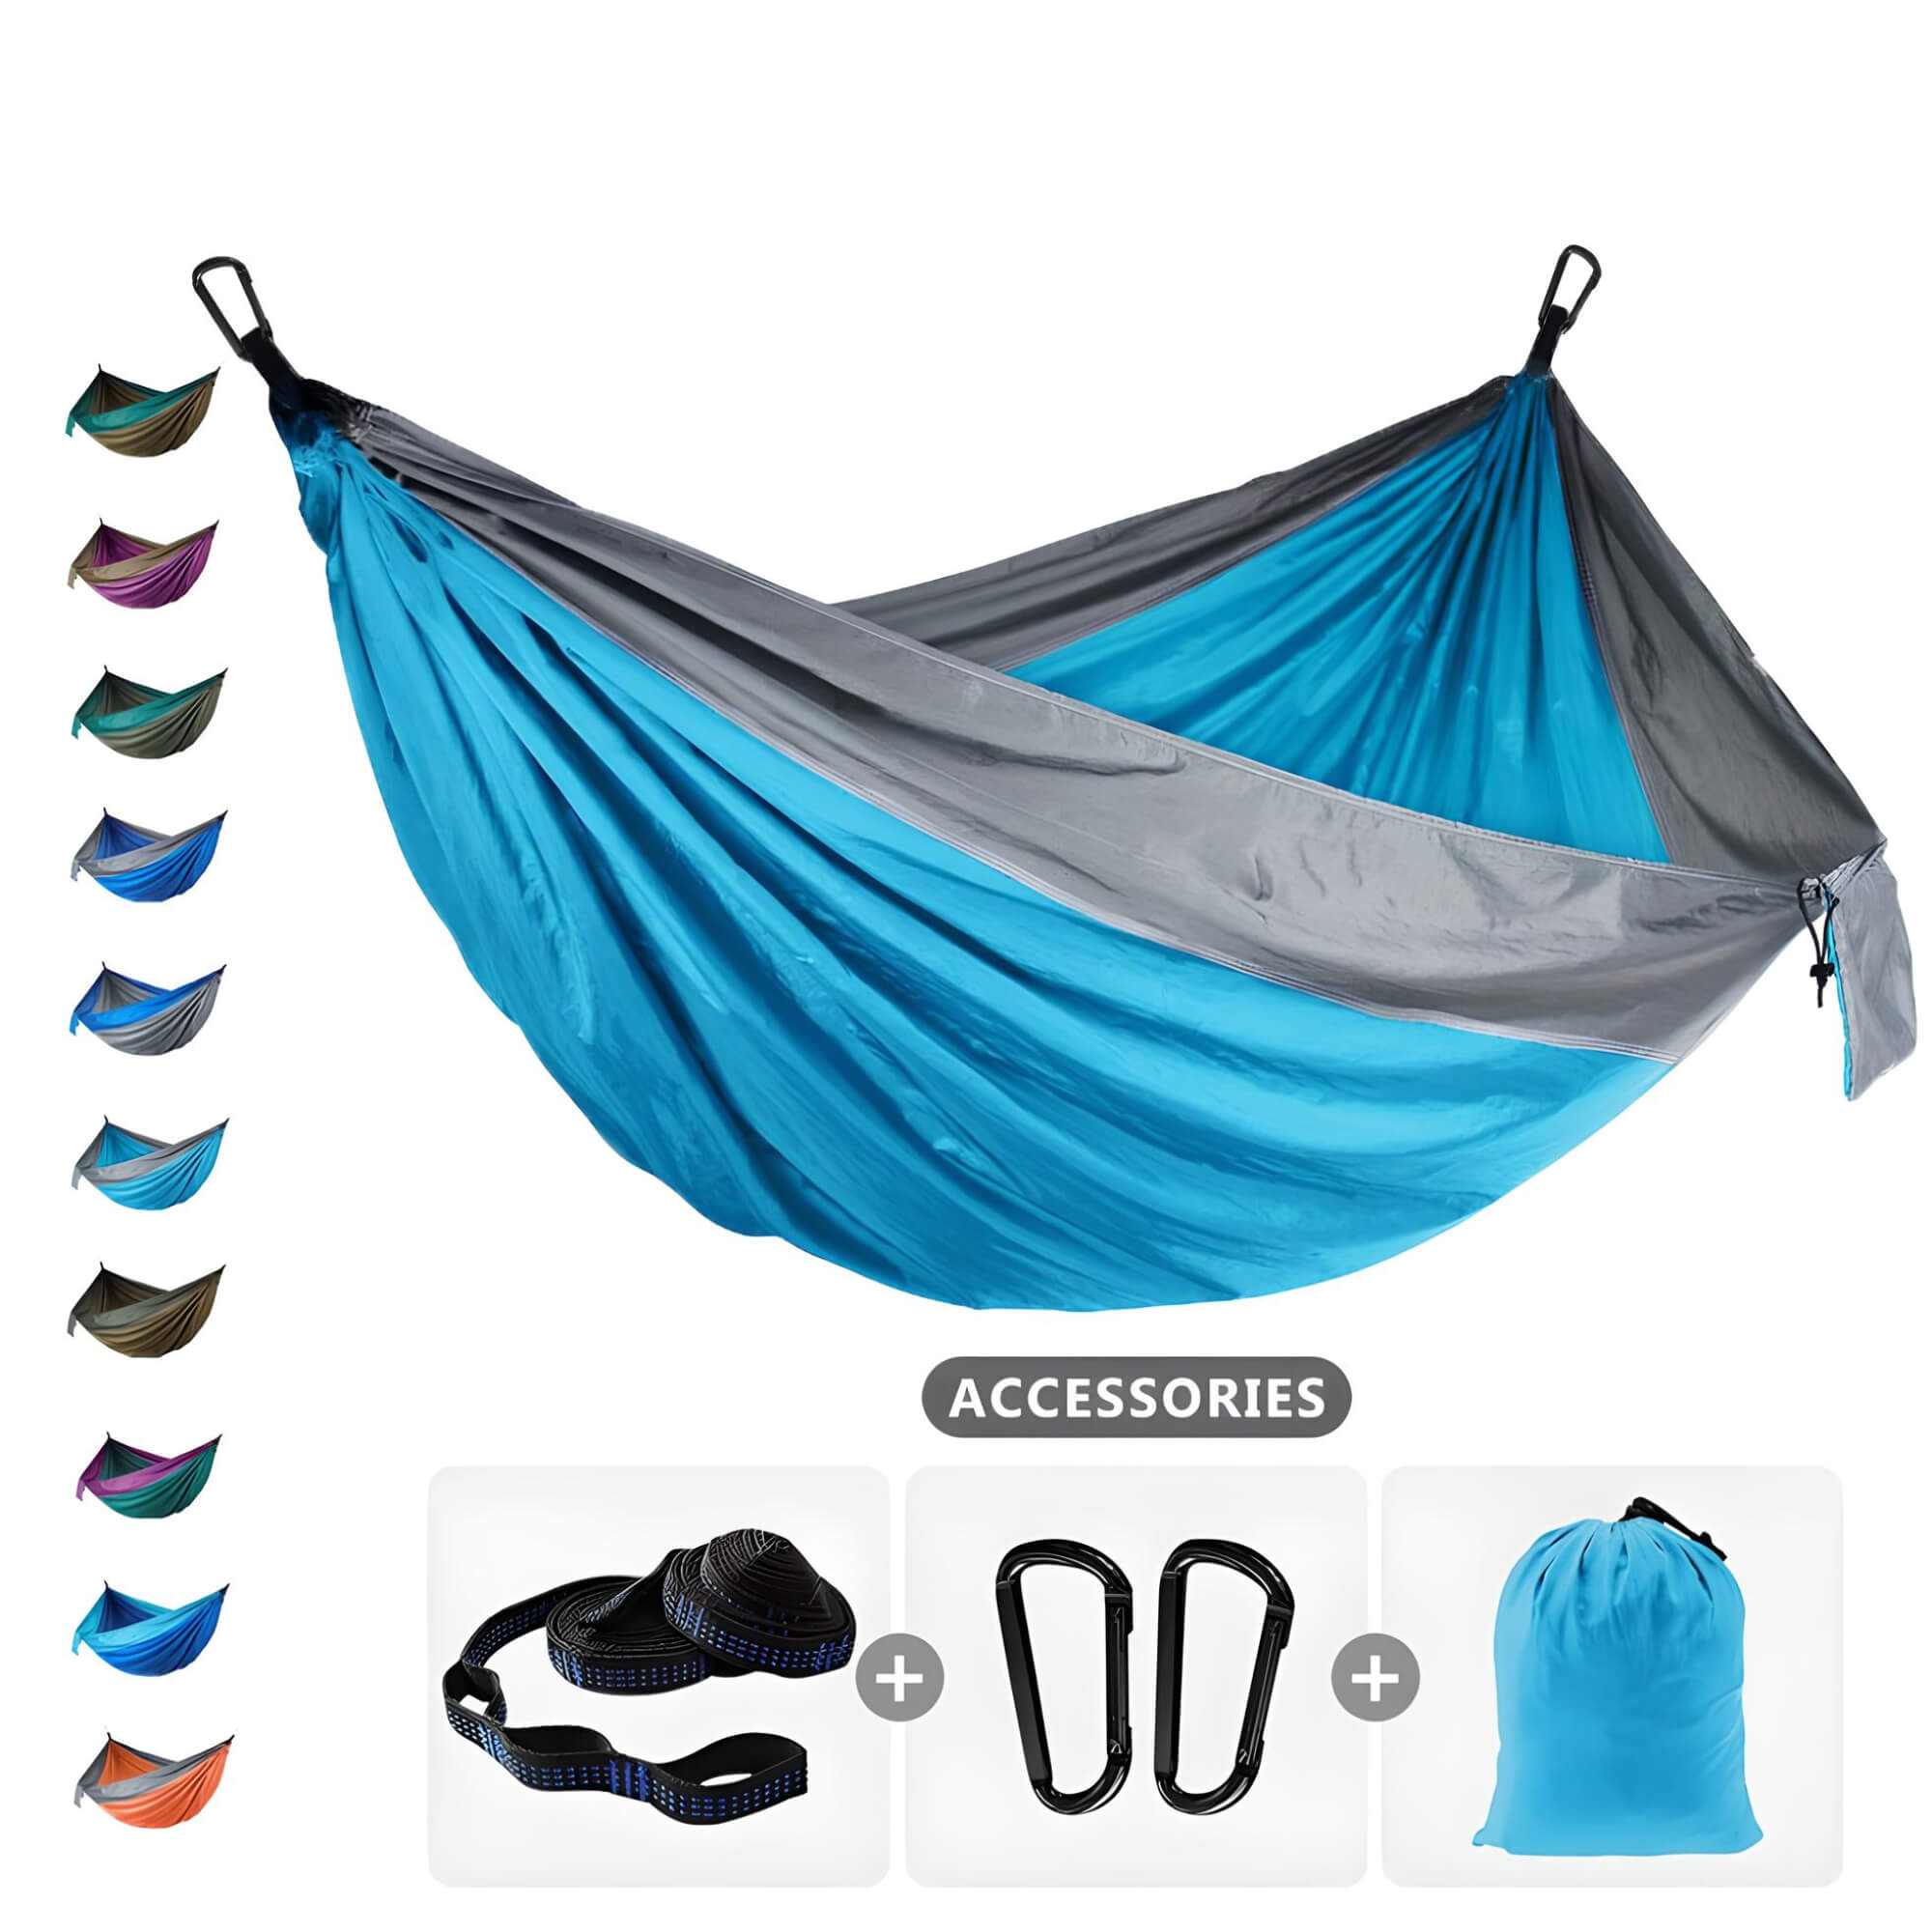 Best Portable Camping Hammock for Outdoor Bliss | Lightweight & Durable